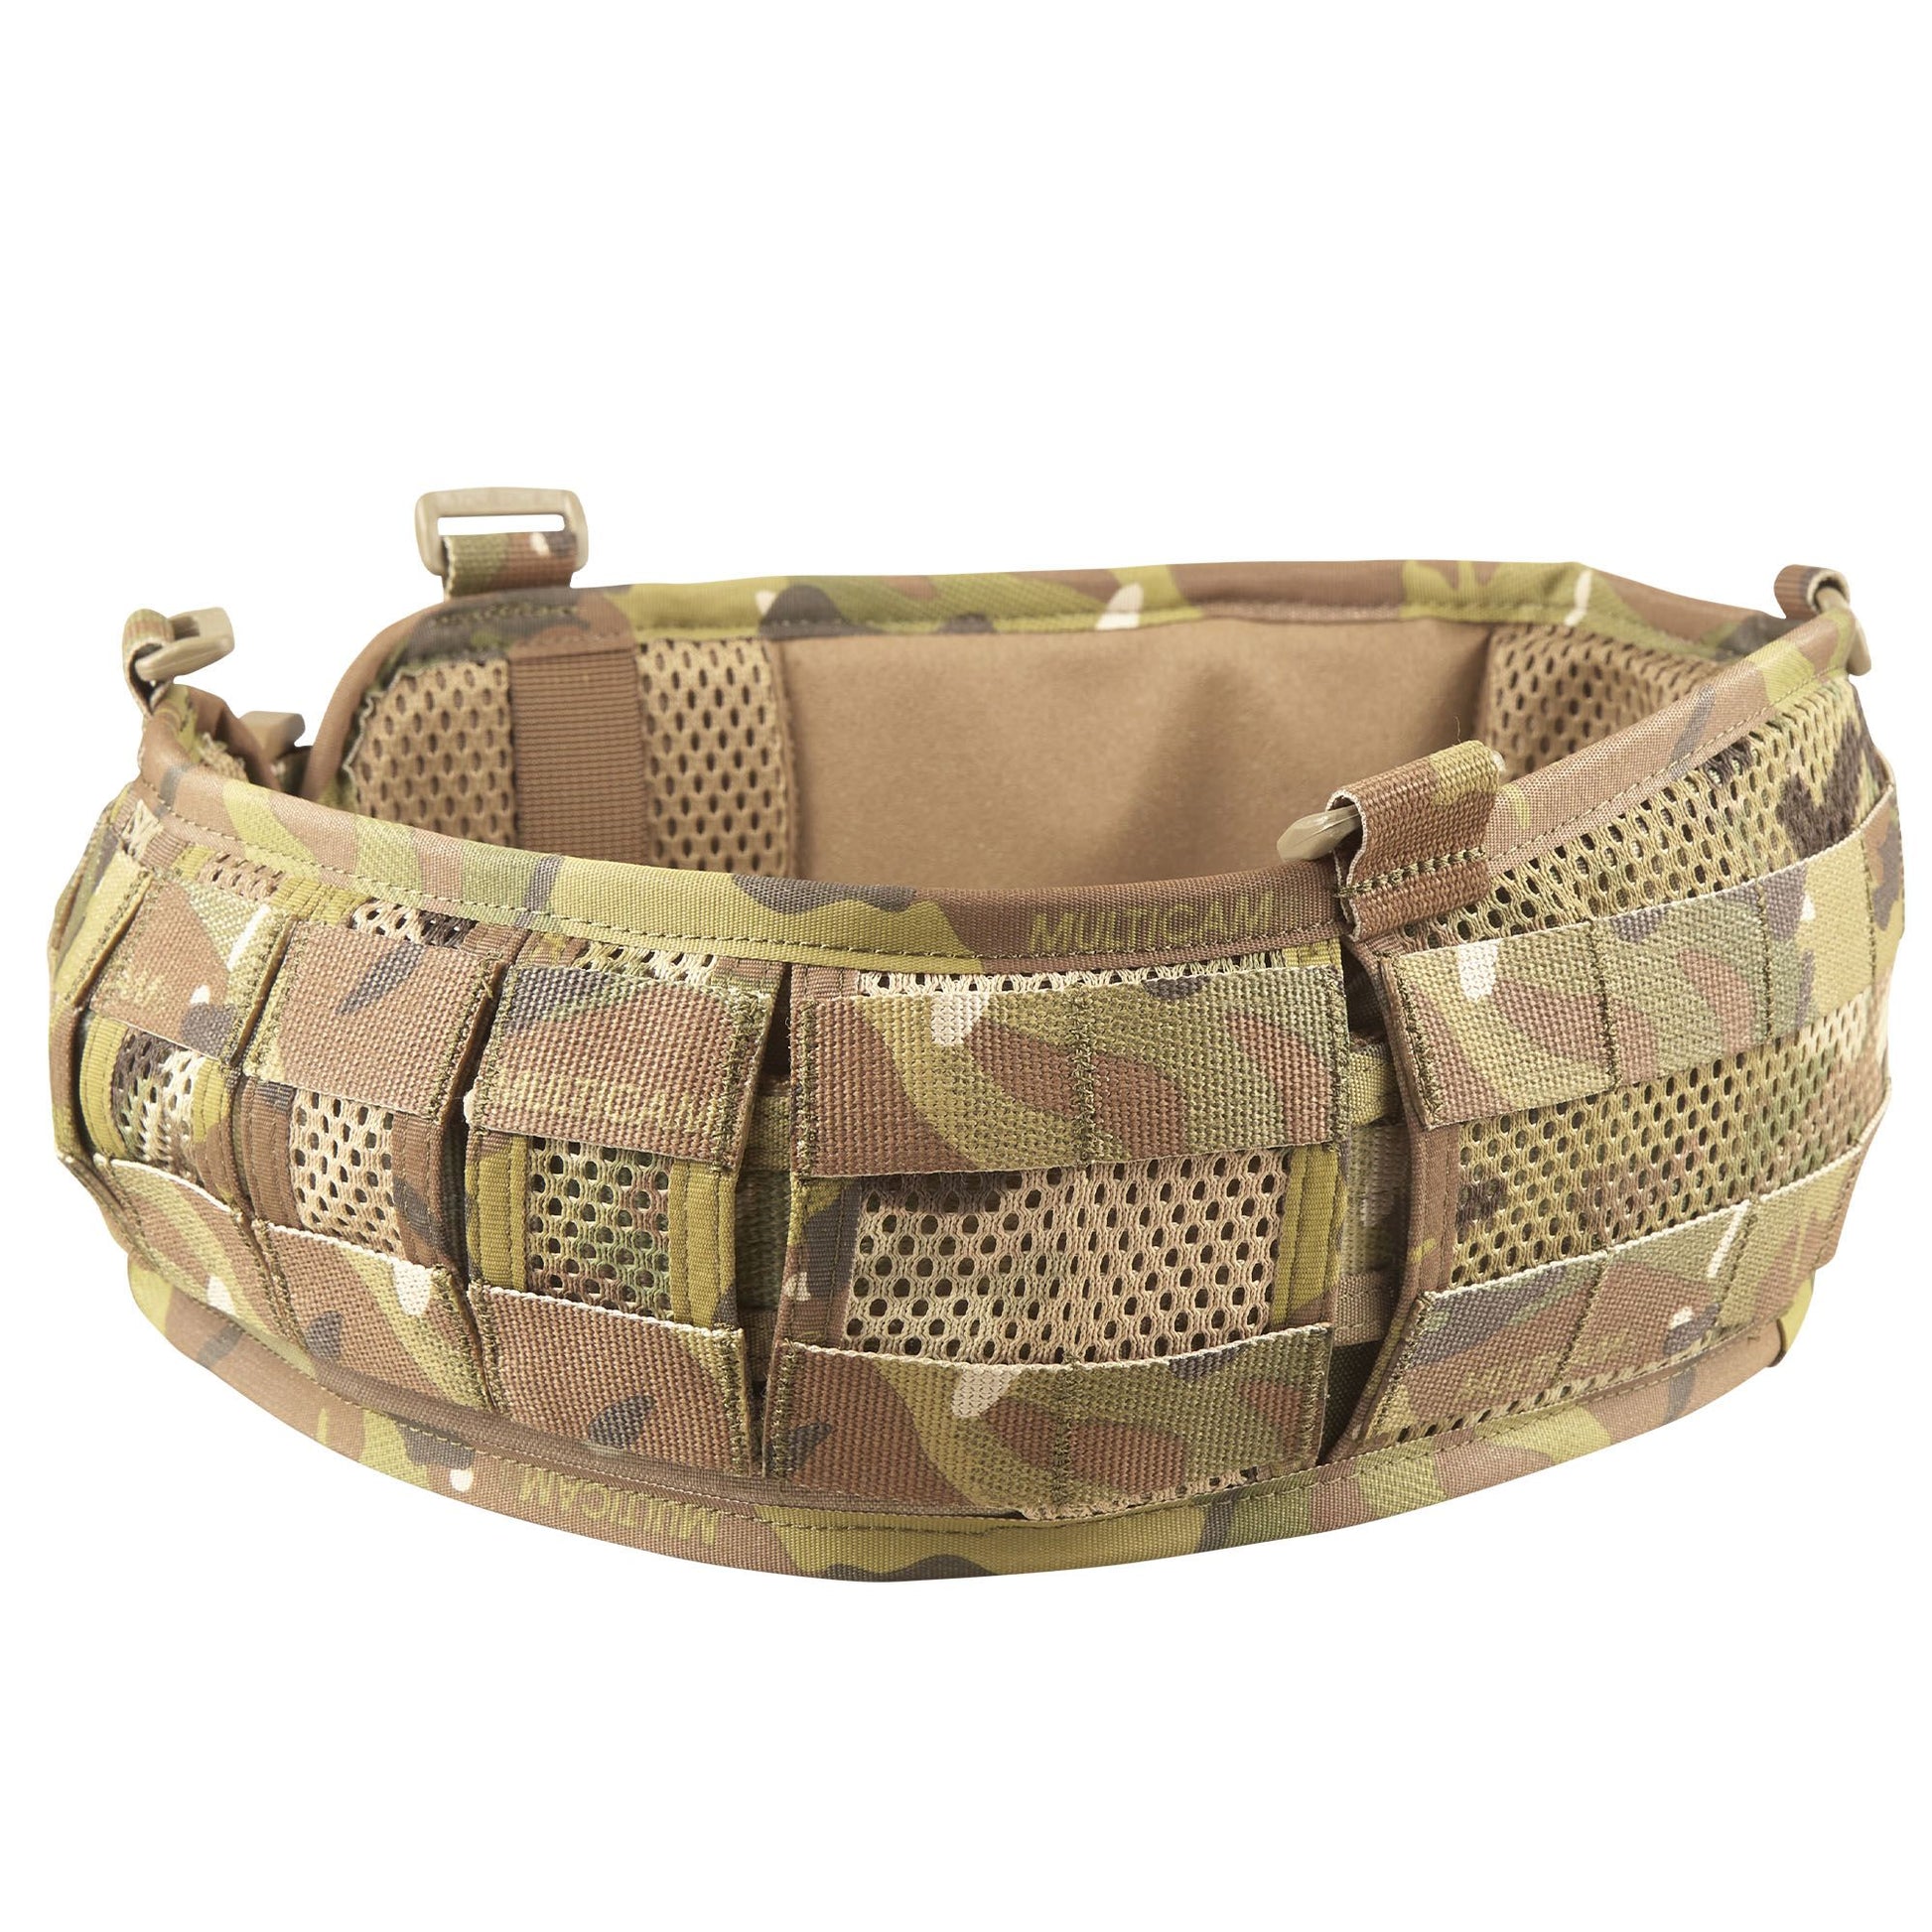 The Platatac 3S belt pad has been around for nearly 4 years, we have now released the MkII a lighter updated version based on the same low profile versatile design of the original 3S belt pad. www.defenceqstore.com.au